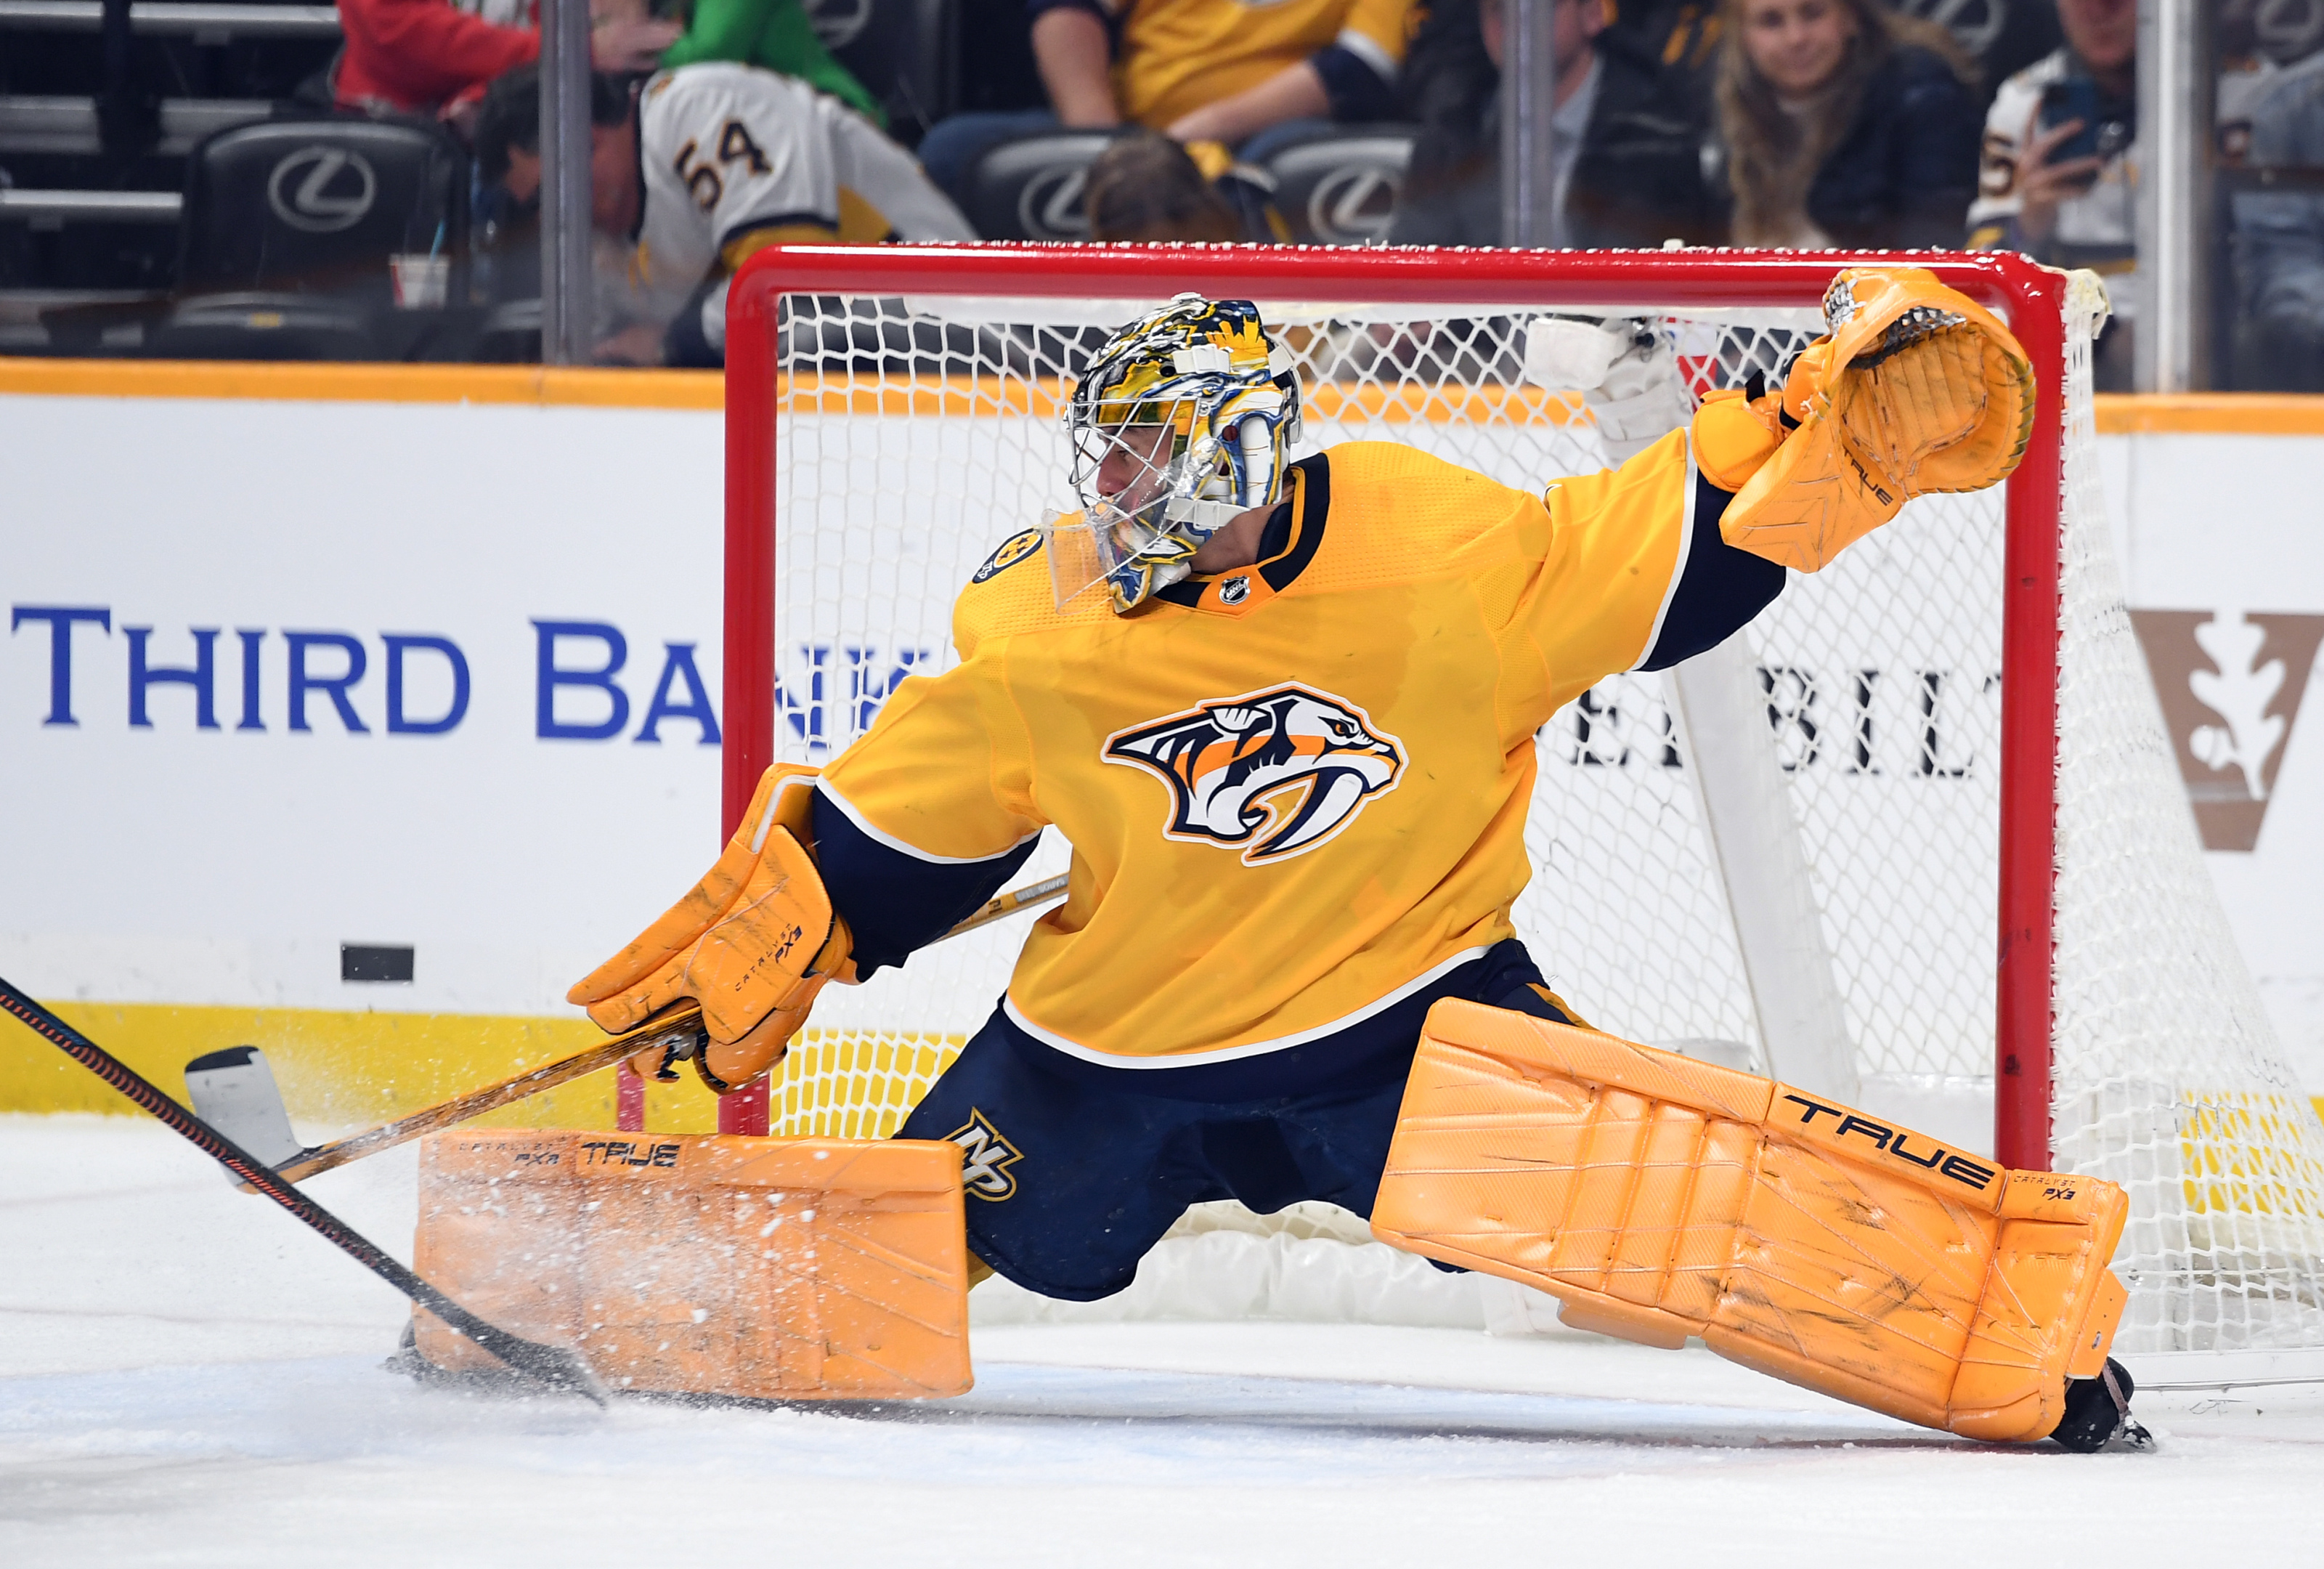 Juuse these saves? 👀 The @predsnhl have themselves a star in Saros.